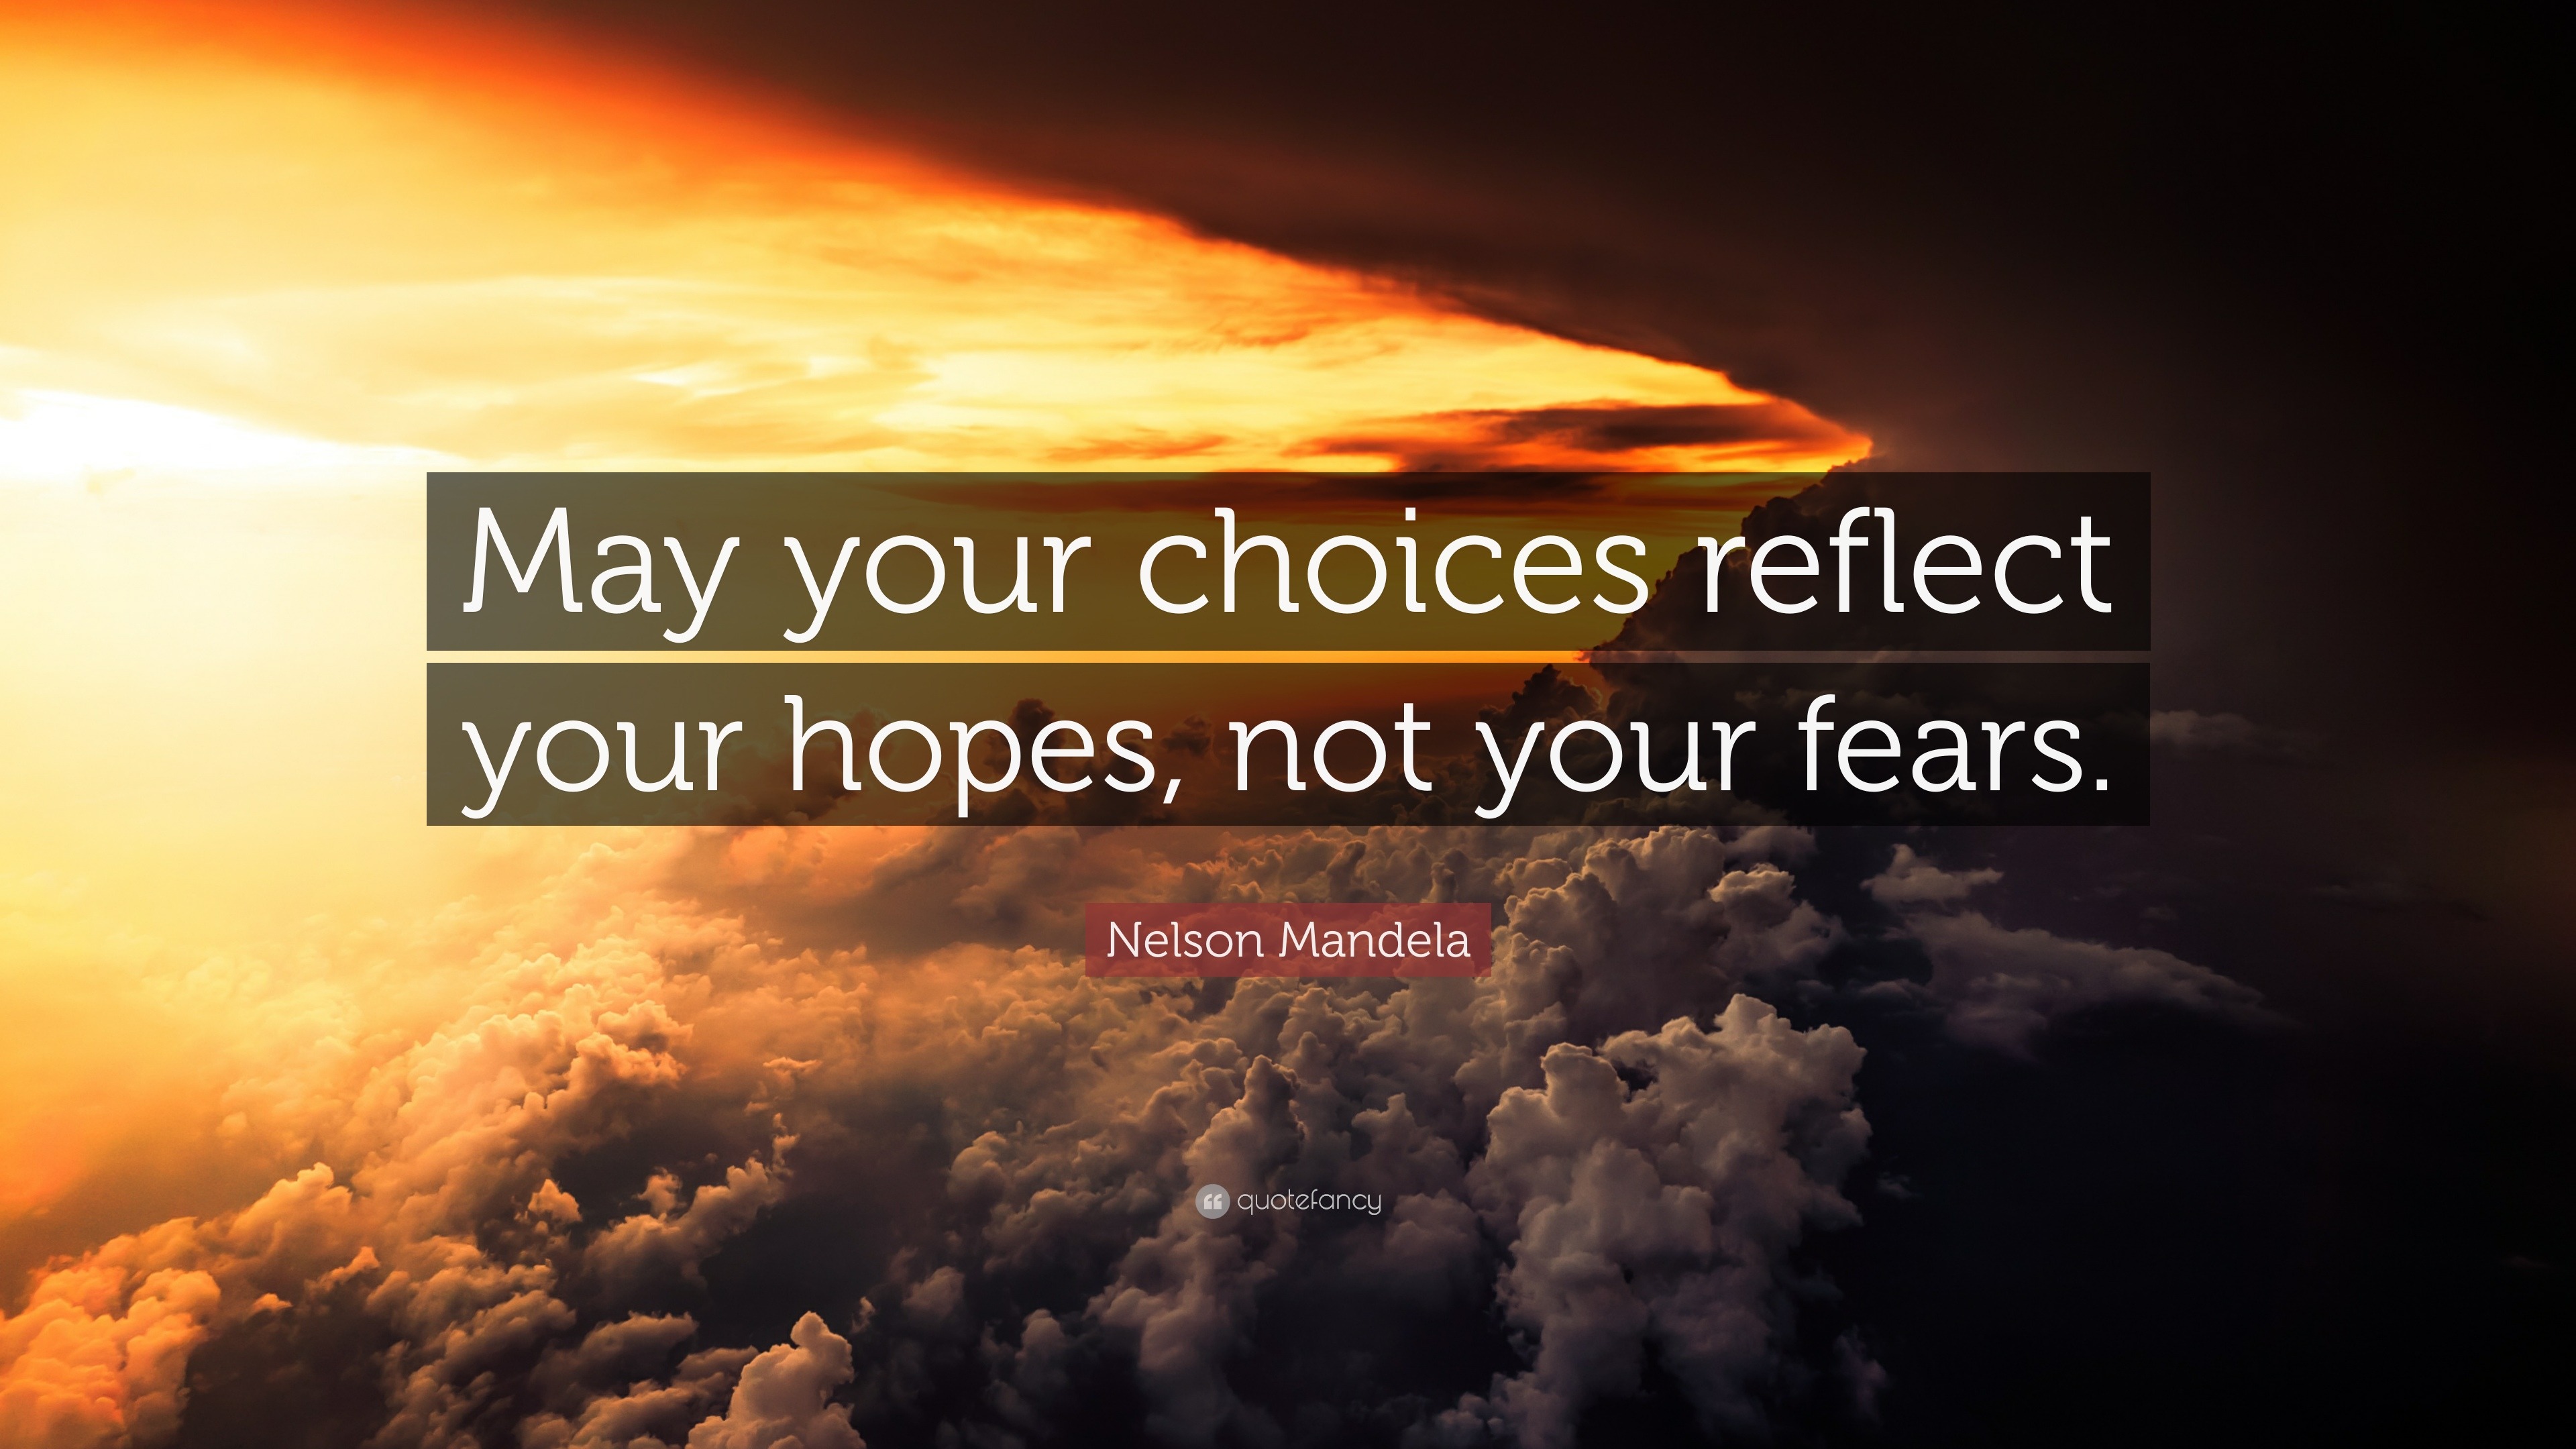 Nelson Mandela Quote: “May your choices reflect your hopes, not your